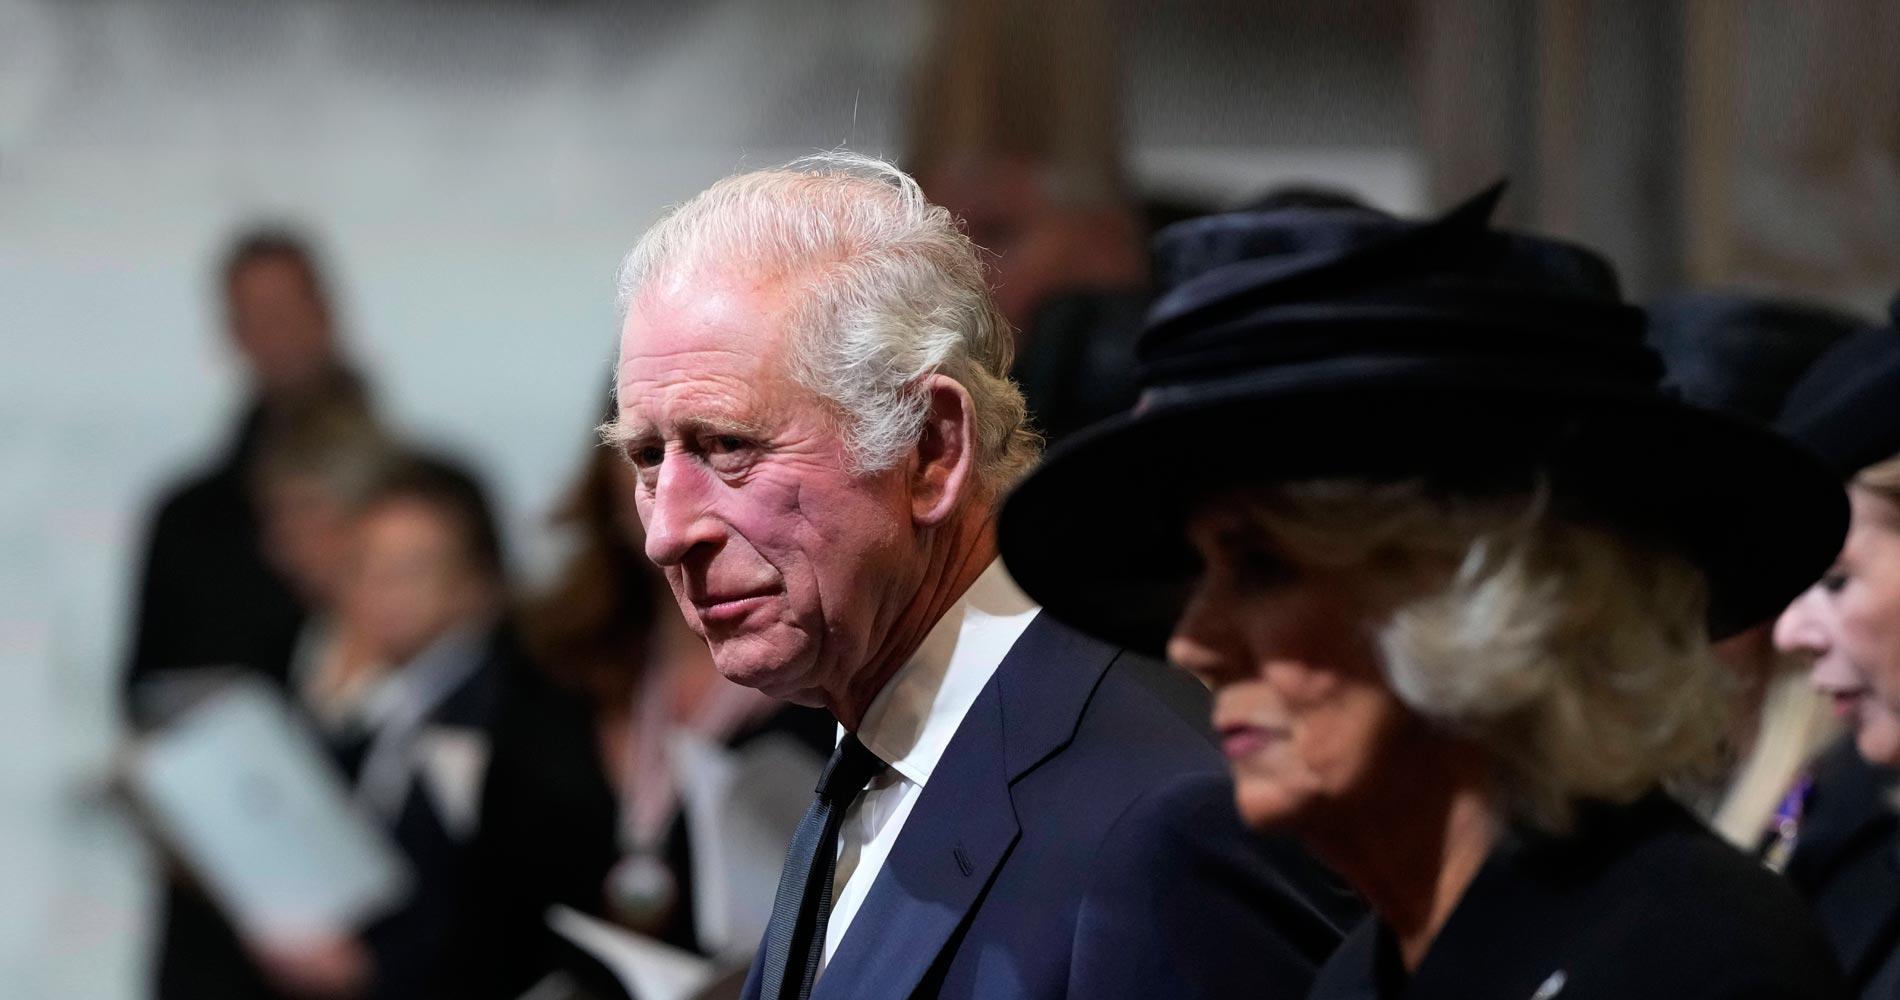 Is there a future for the British monarchy?